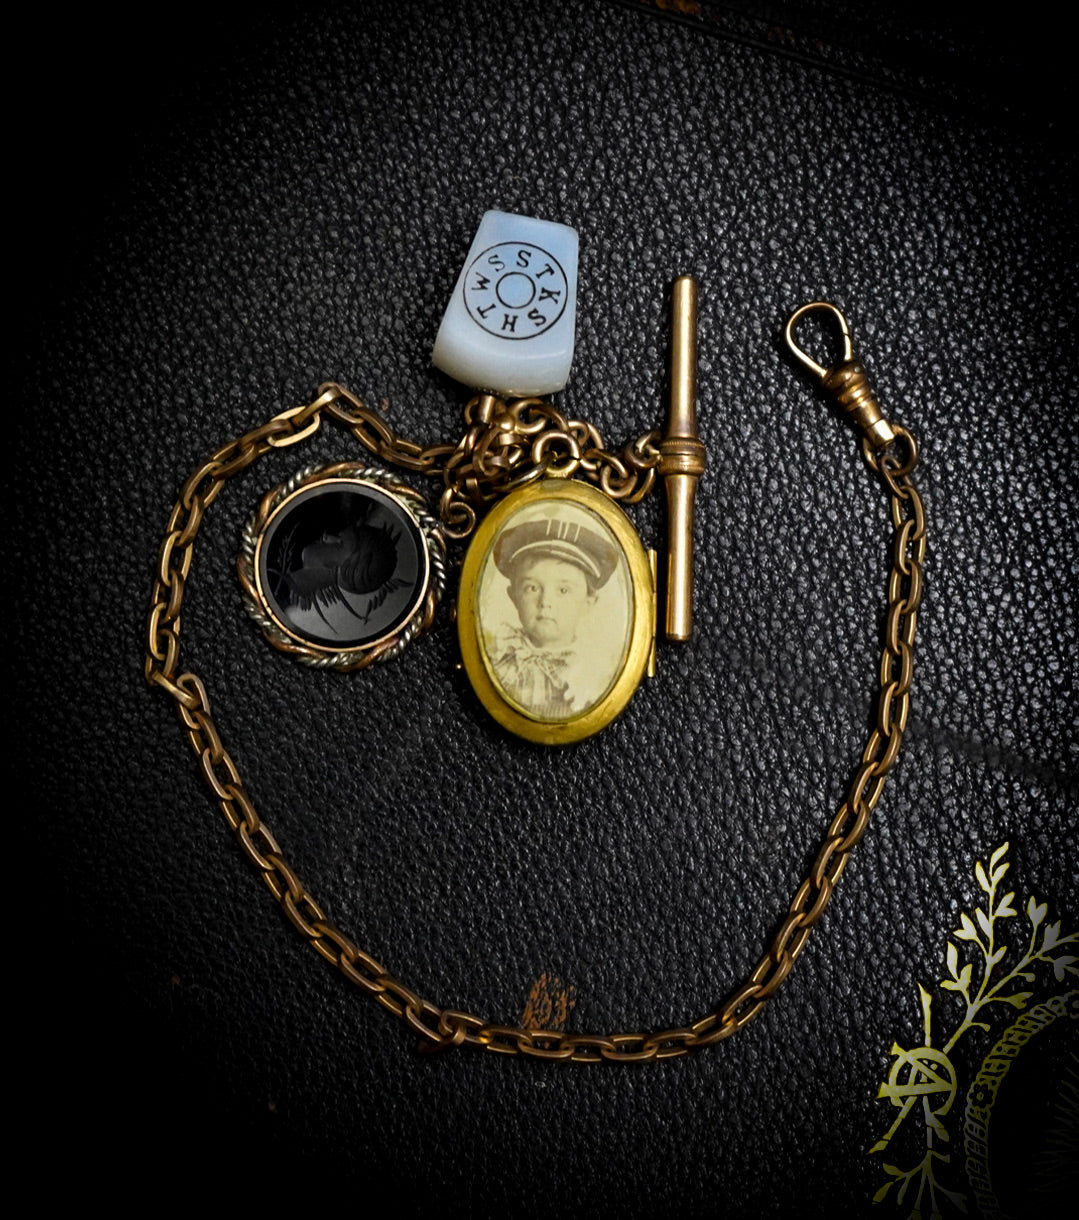 Gold Fill "Treasures" Mourning Watch Chain